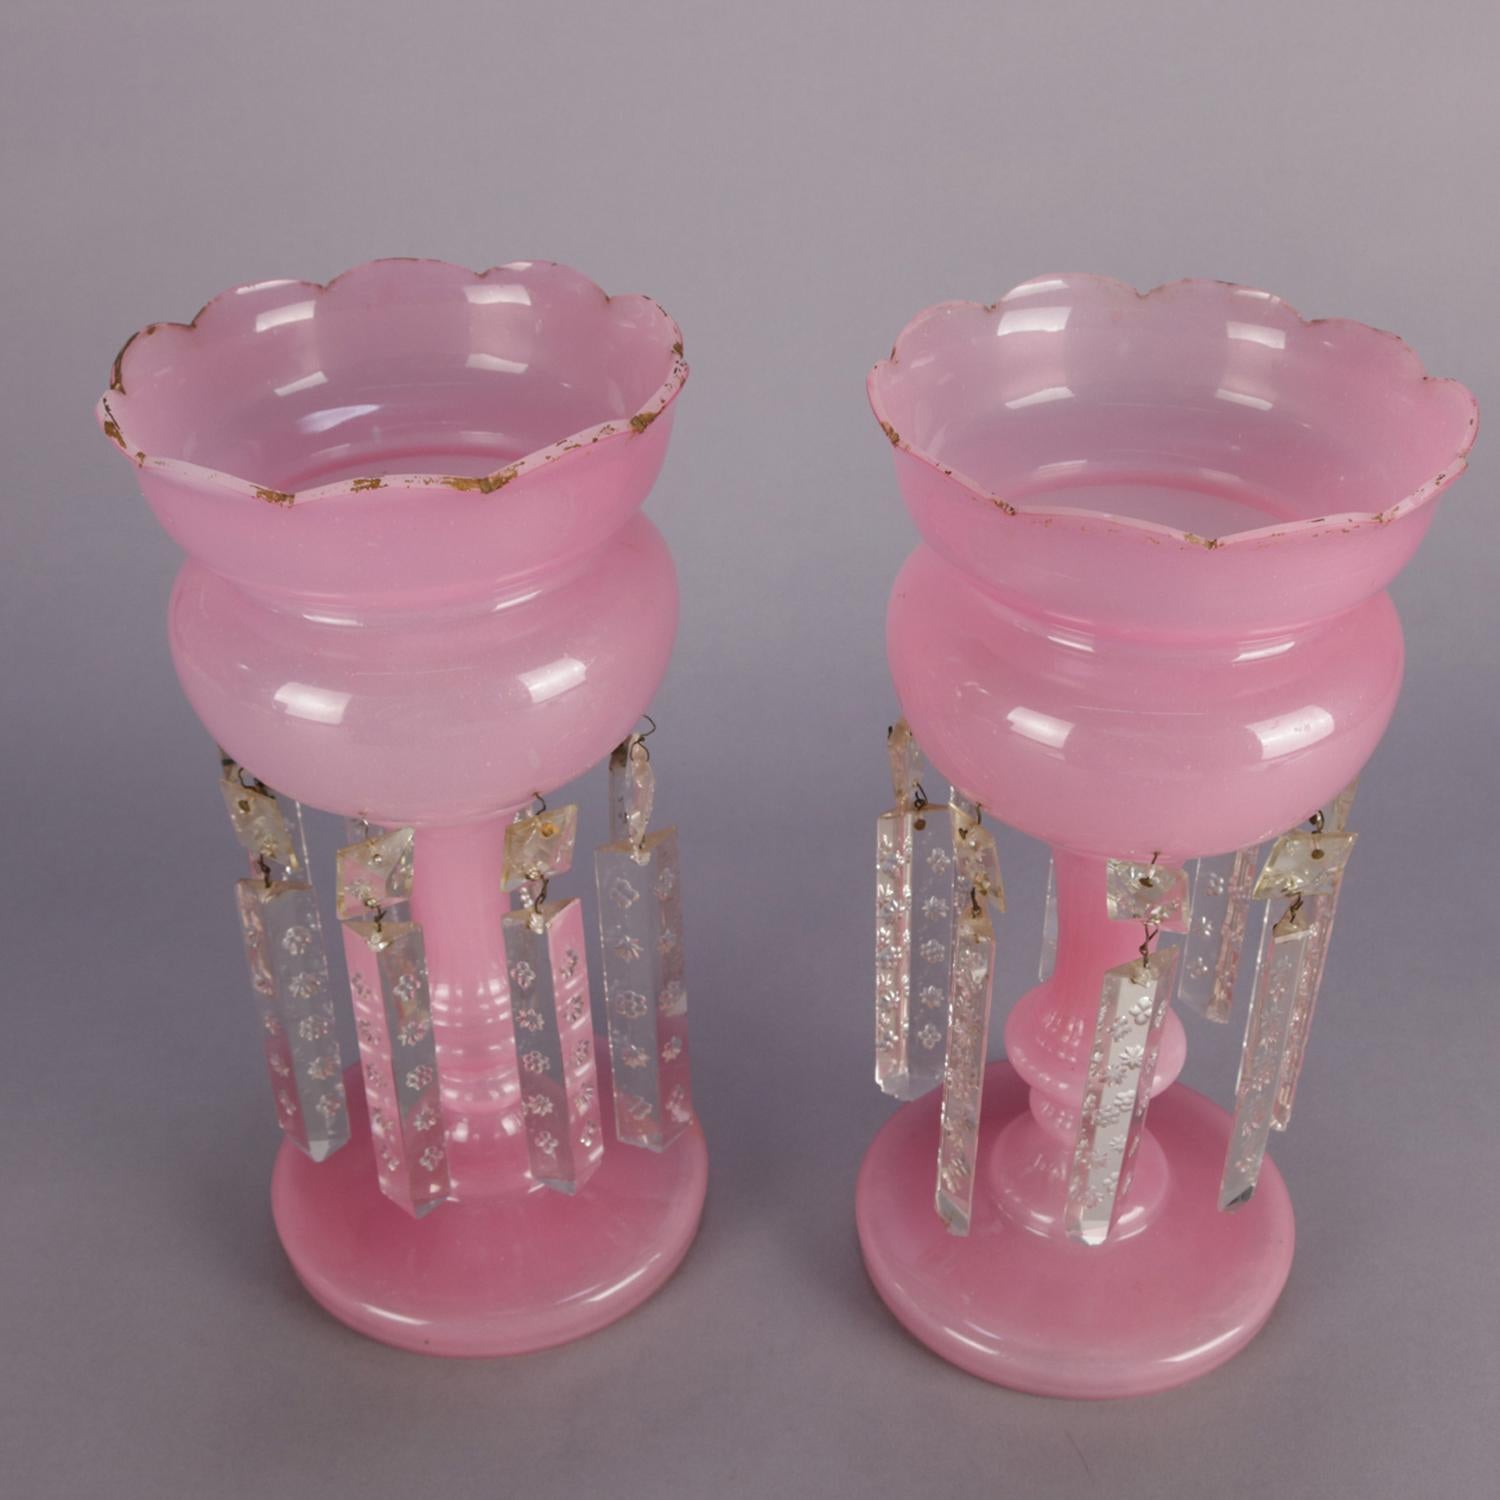 Antique Victorian pair of pink Bristol glass mantel luster’s with ruffled rims, gilt highlights and cut crystal hanging prisms, circa 1890.

Measures: 12